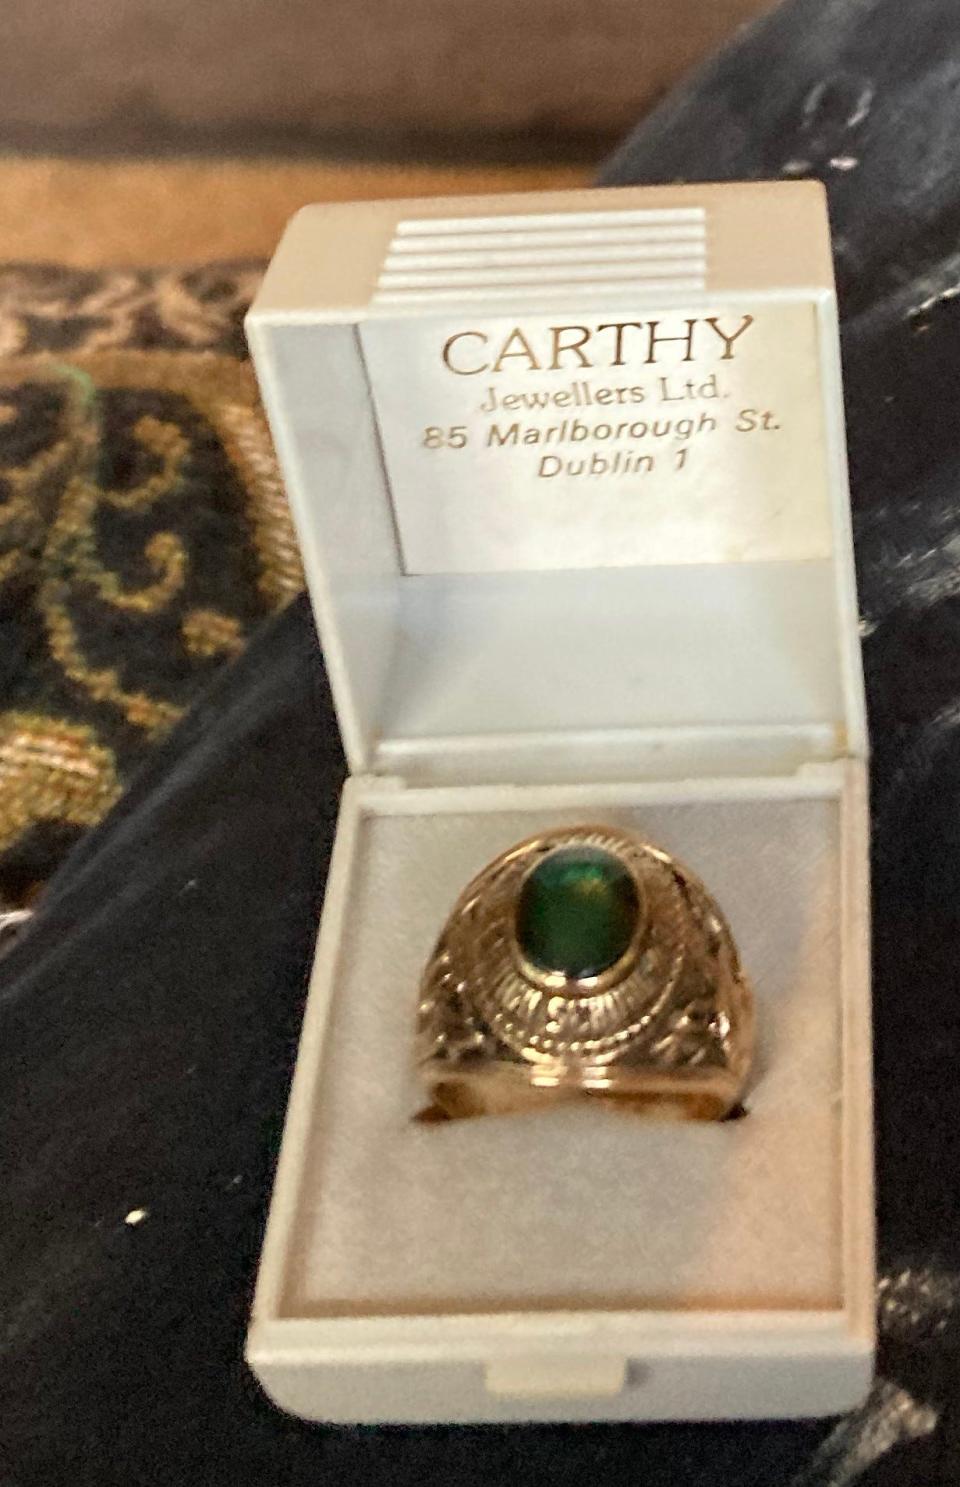 The ring had been kept in a case in Ireland.